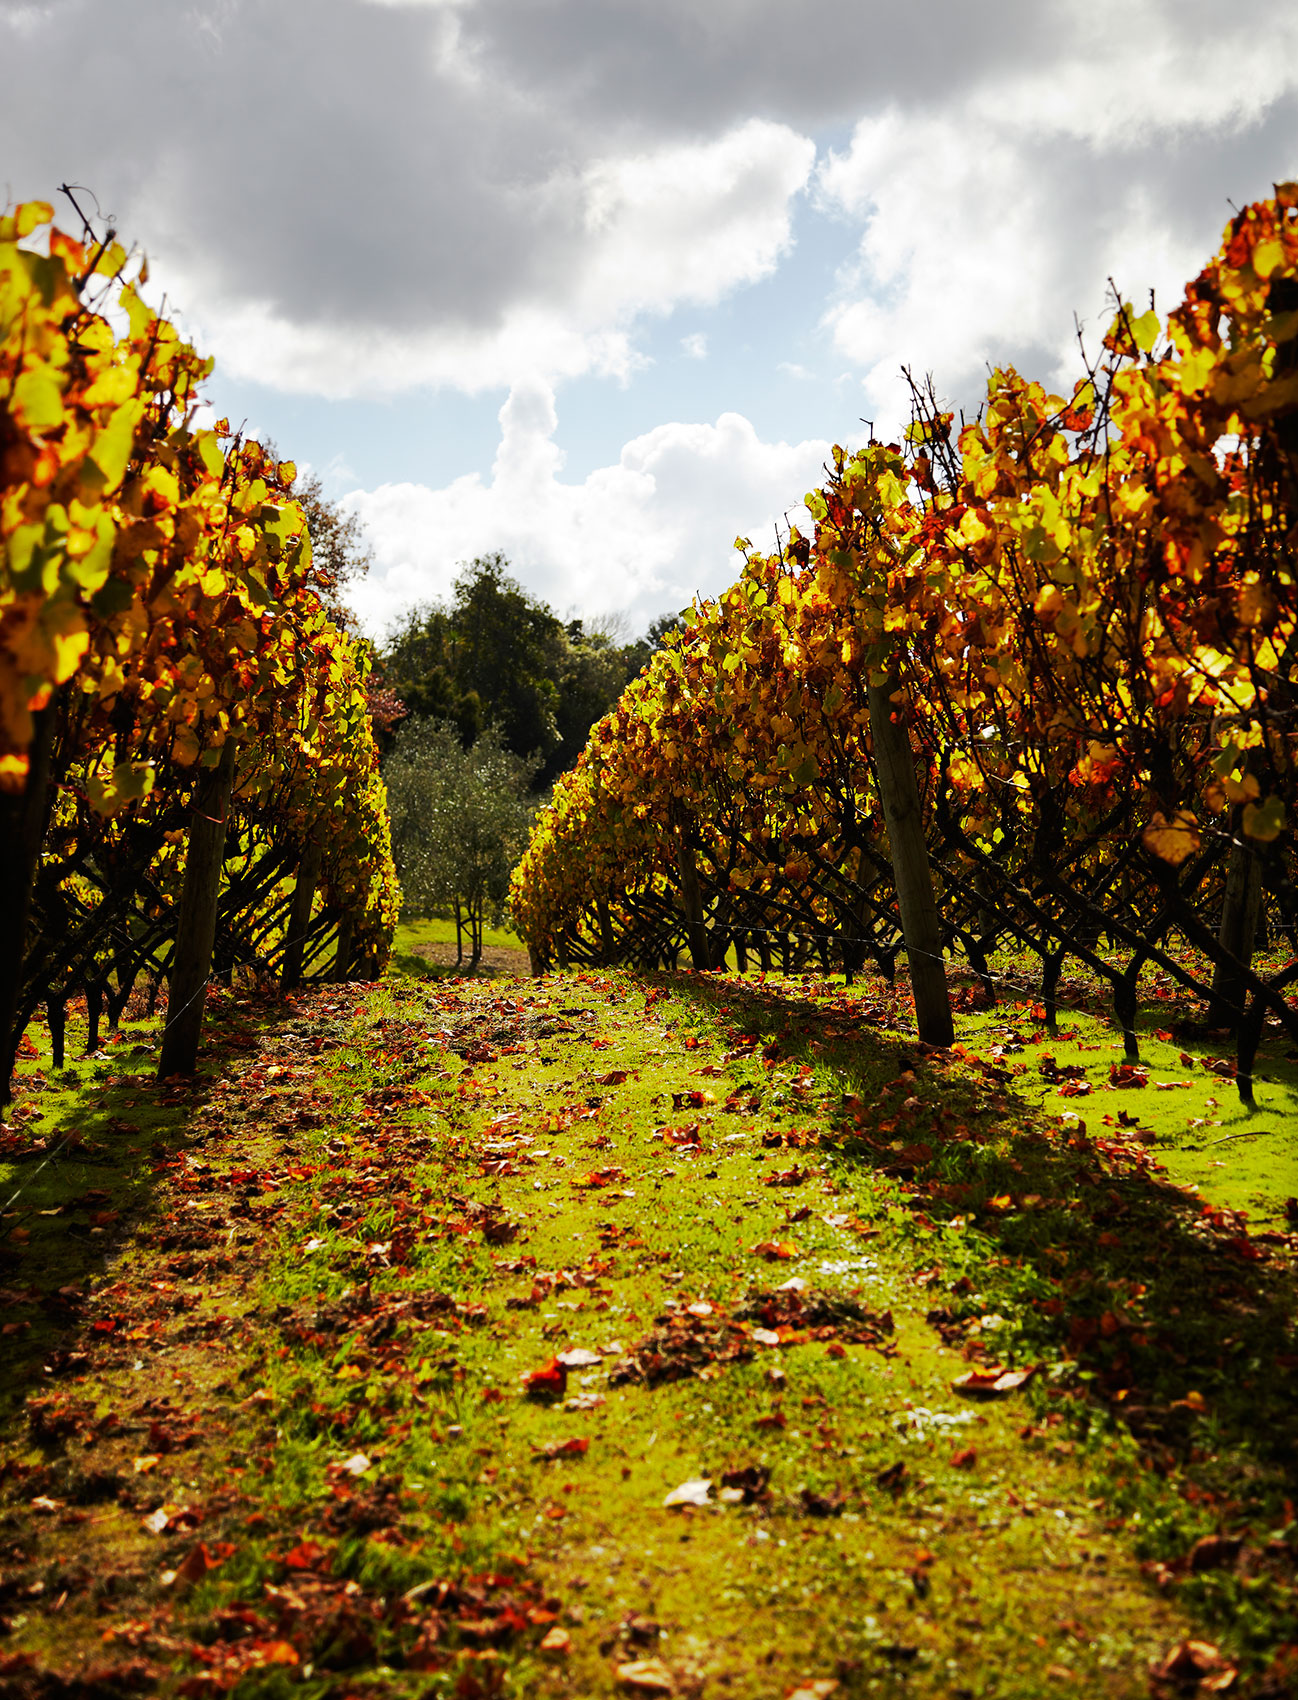 Winery Lunch in Autumn Grapevines • Lifestyle & Documentary Photography